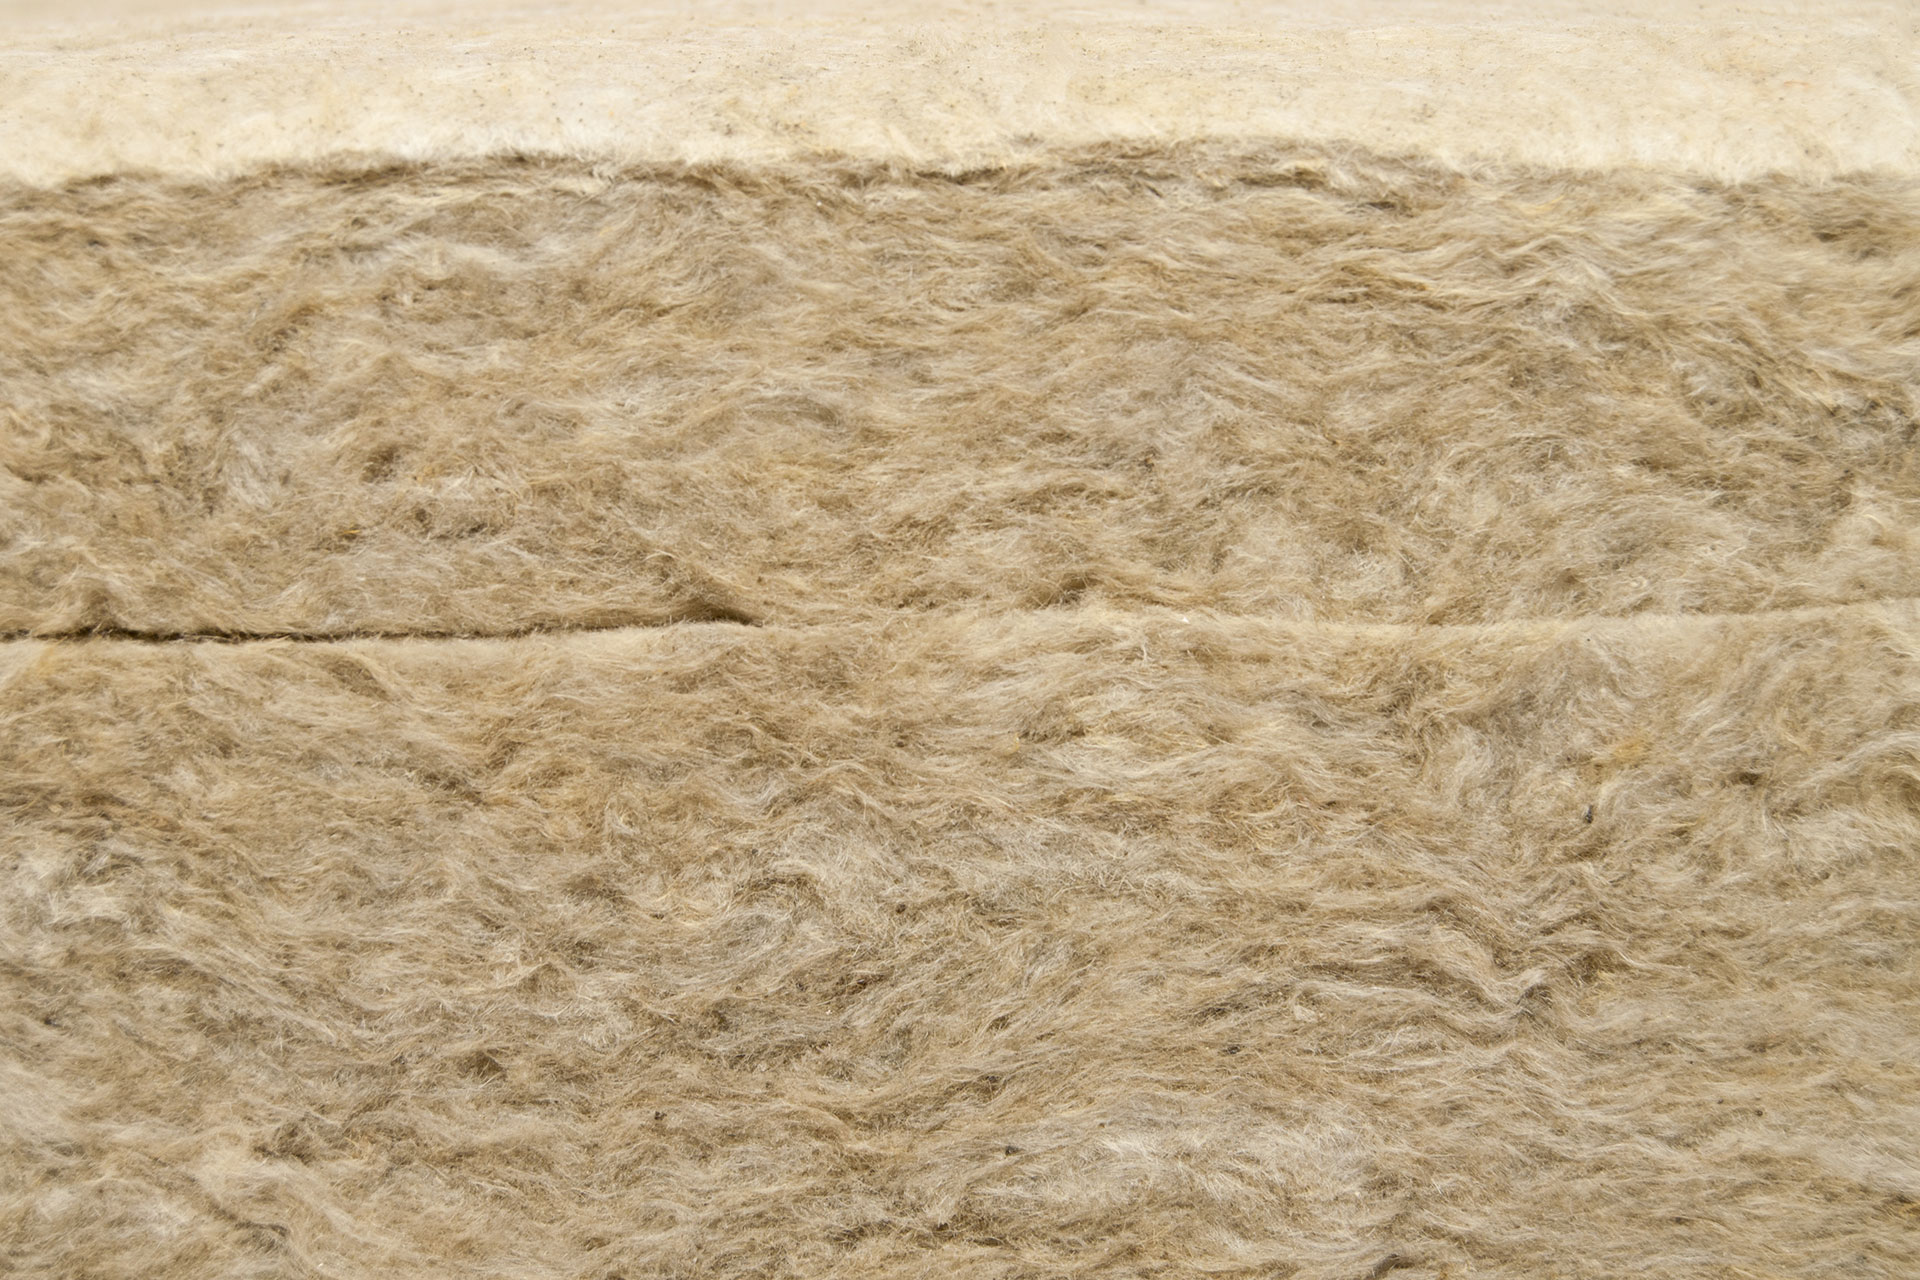 Mineral wool manufactured with magnesium carbonate